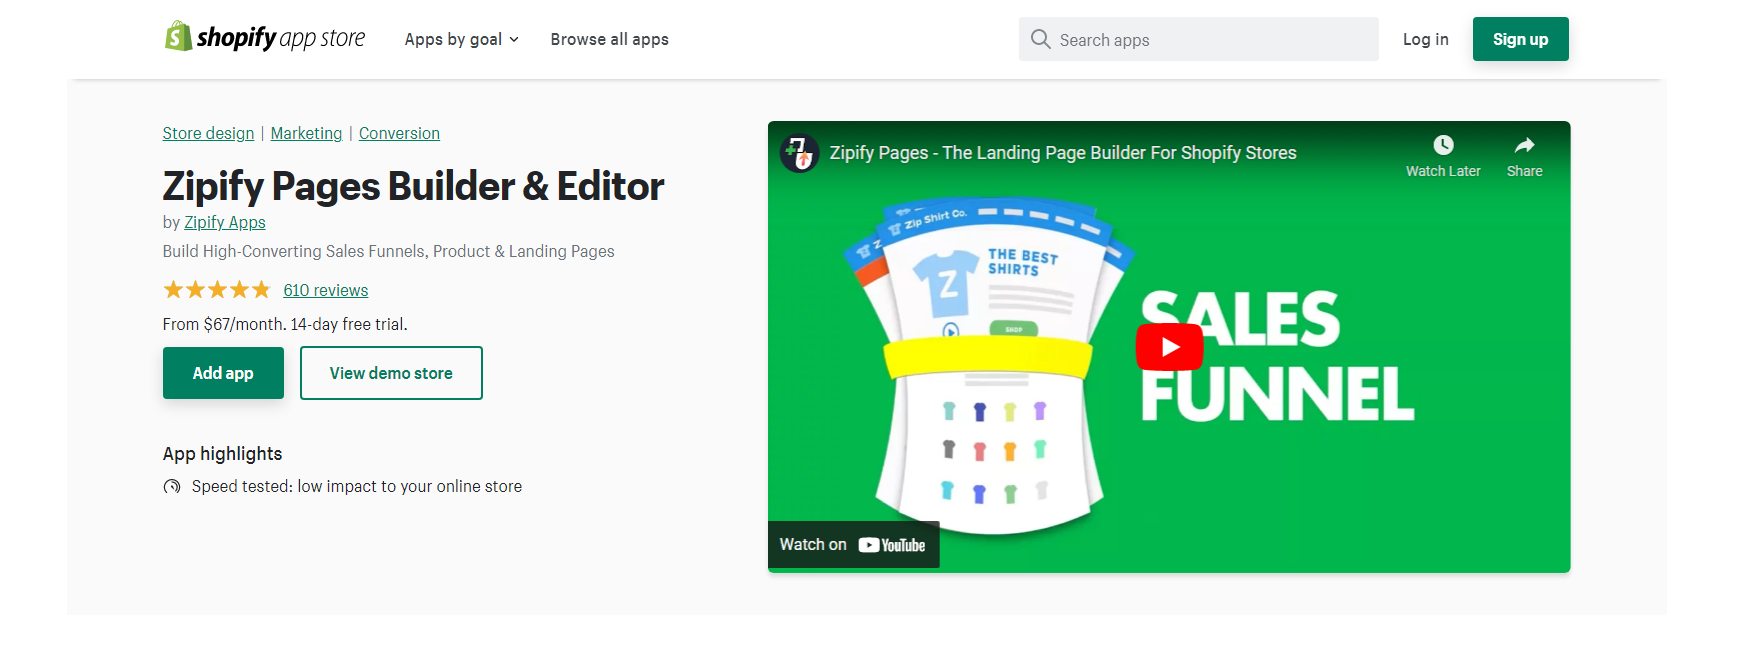 Zipify Pages - Shopify page builder